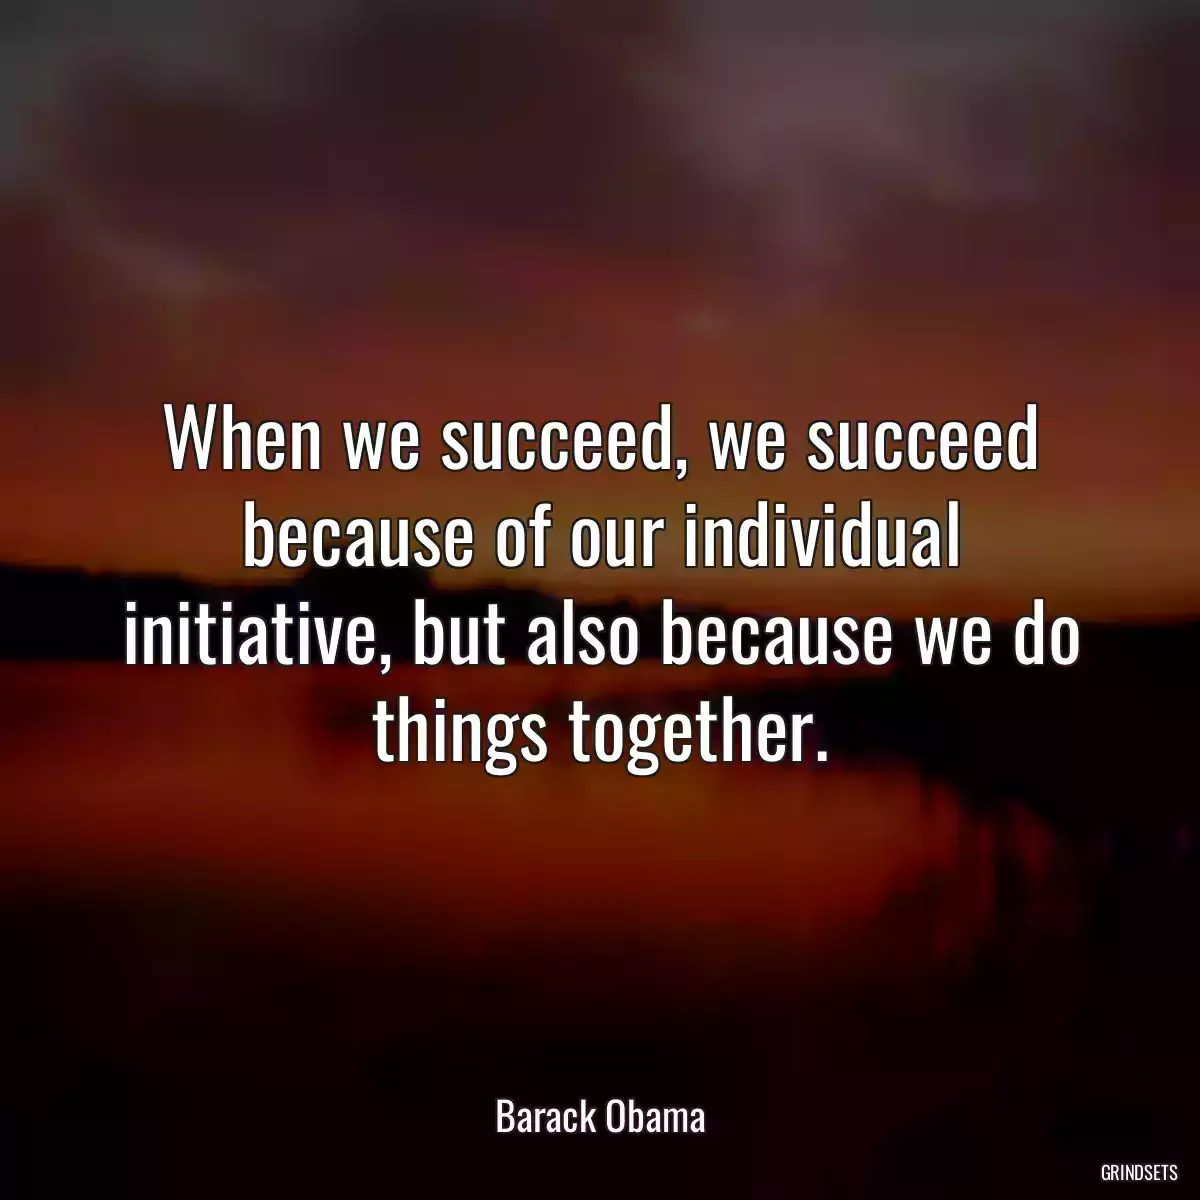 When we succeed, we succeed because of our individual initiative, but also because we do things together.